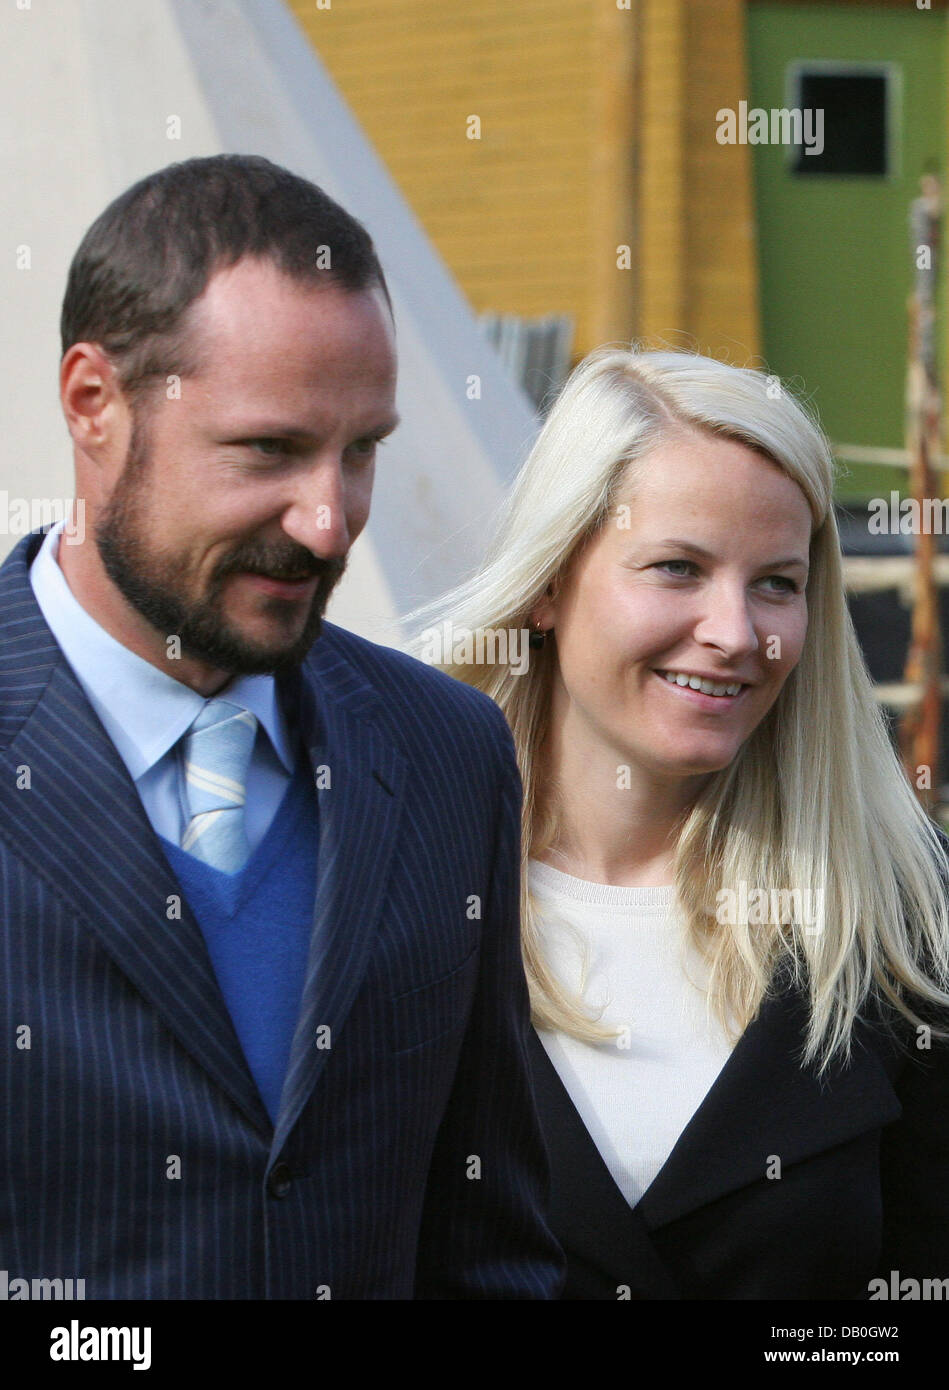 Crown Prince Haakon Of Norway L And Crown Princess Mette Marit Of Norway R Pictured In